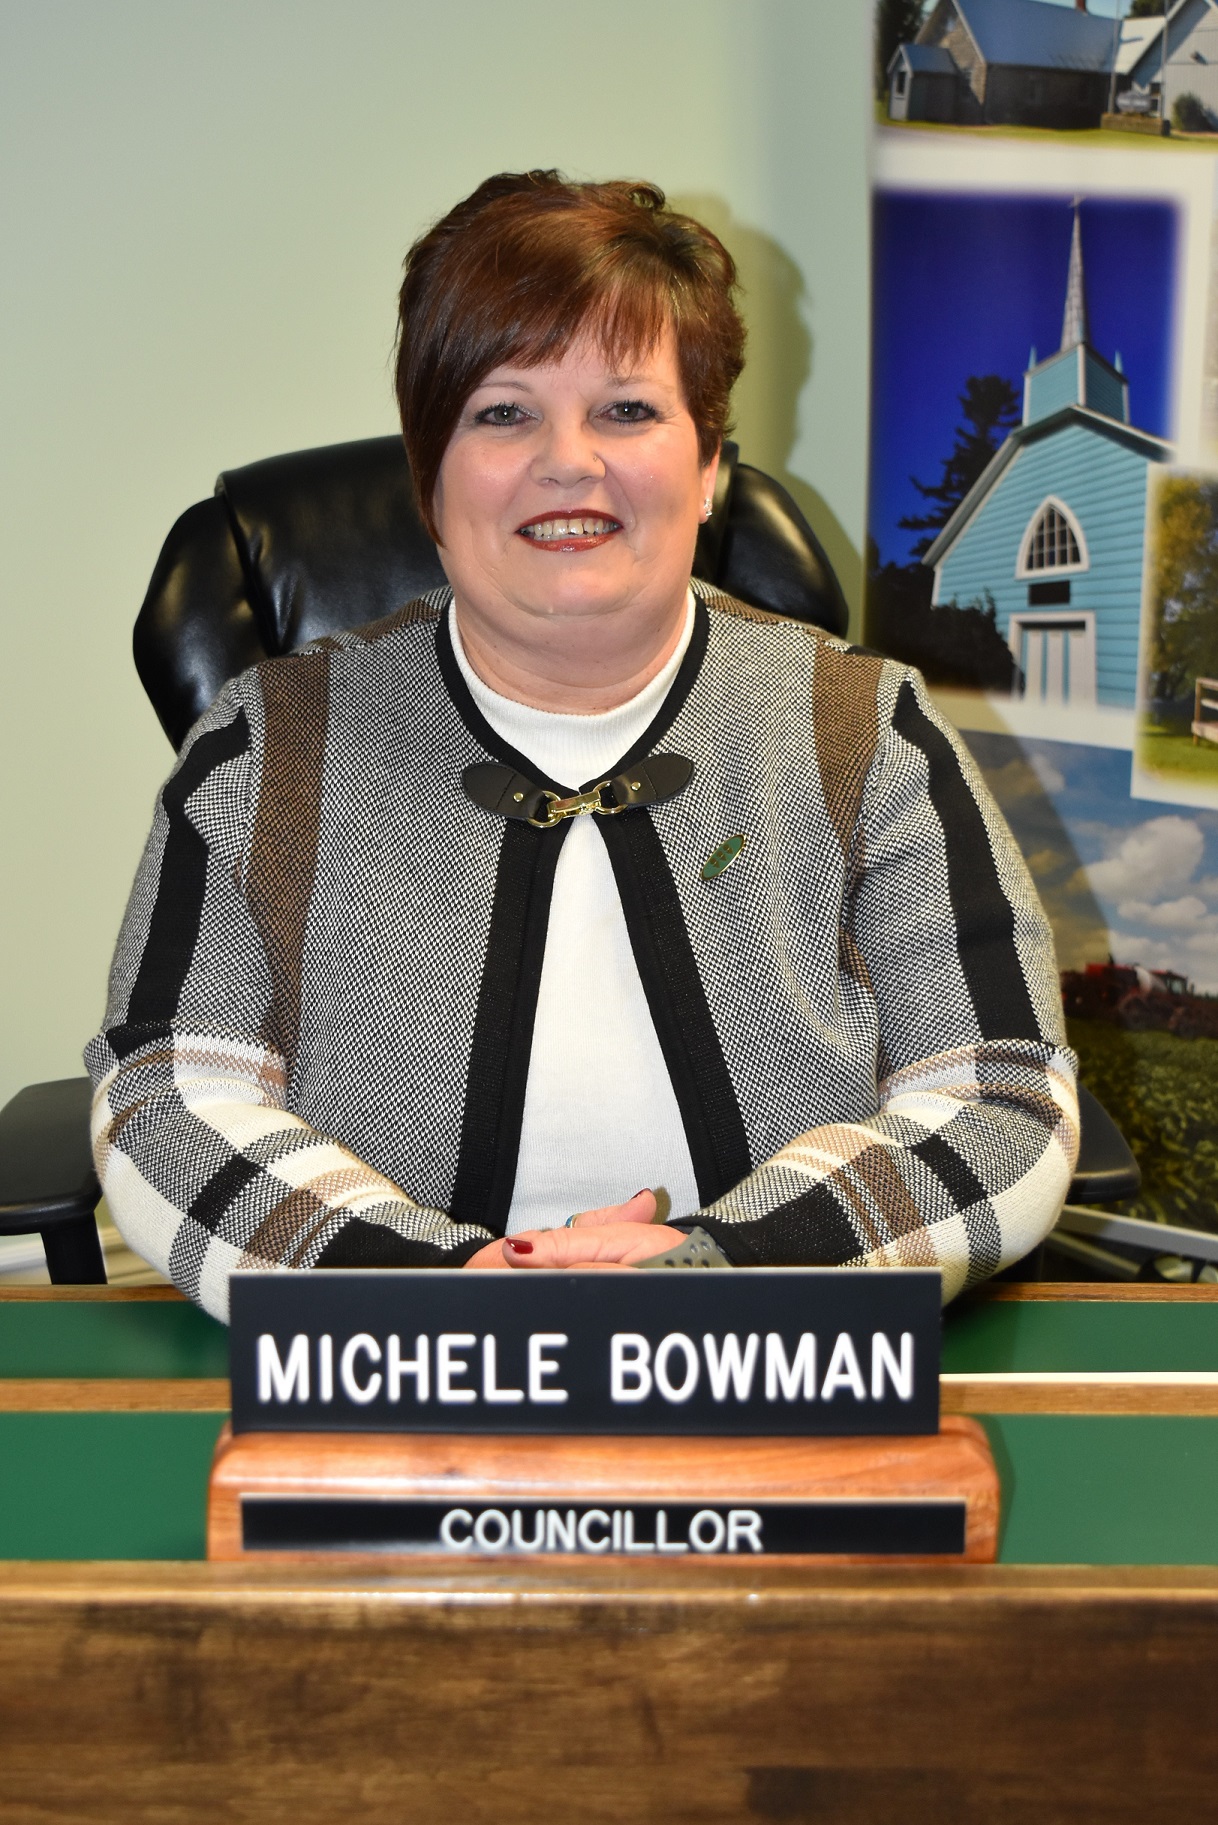 Michele Bowman in her seat at in the council chambers